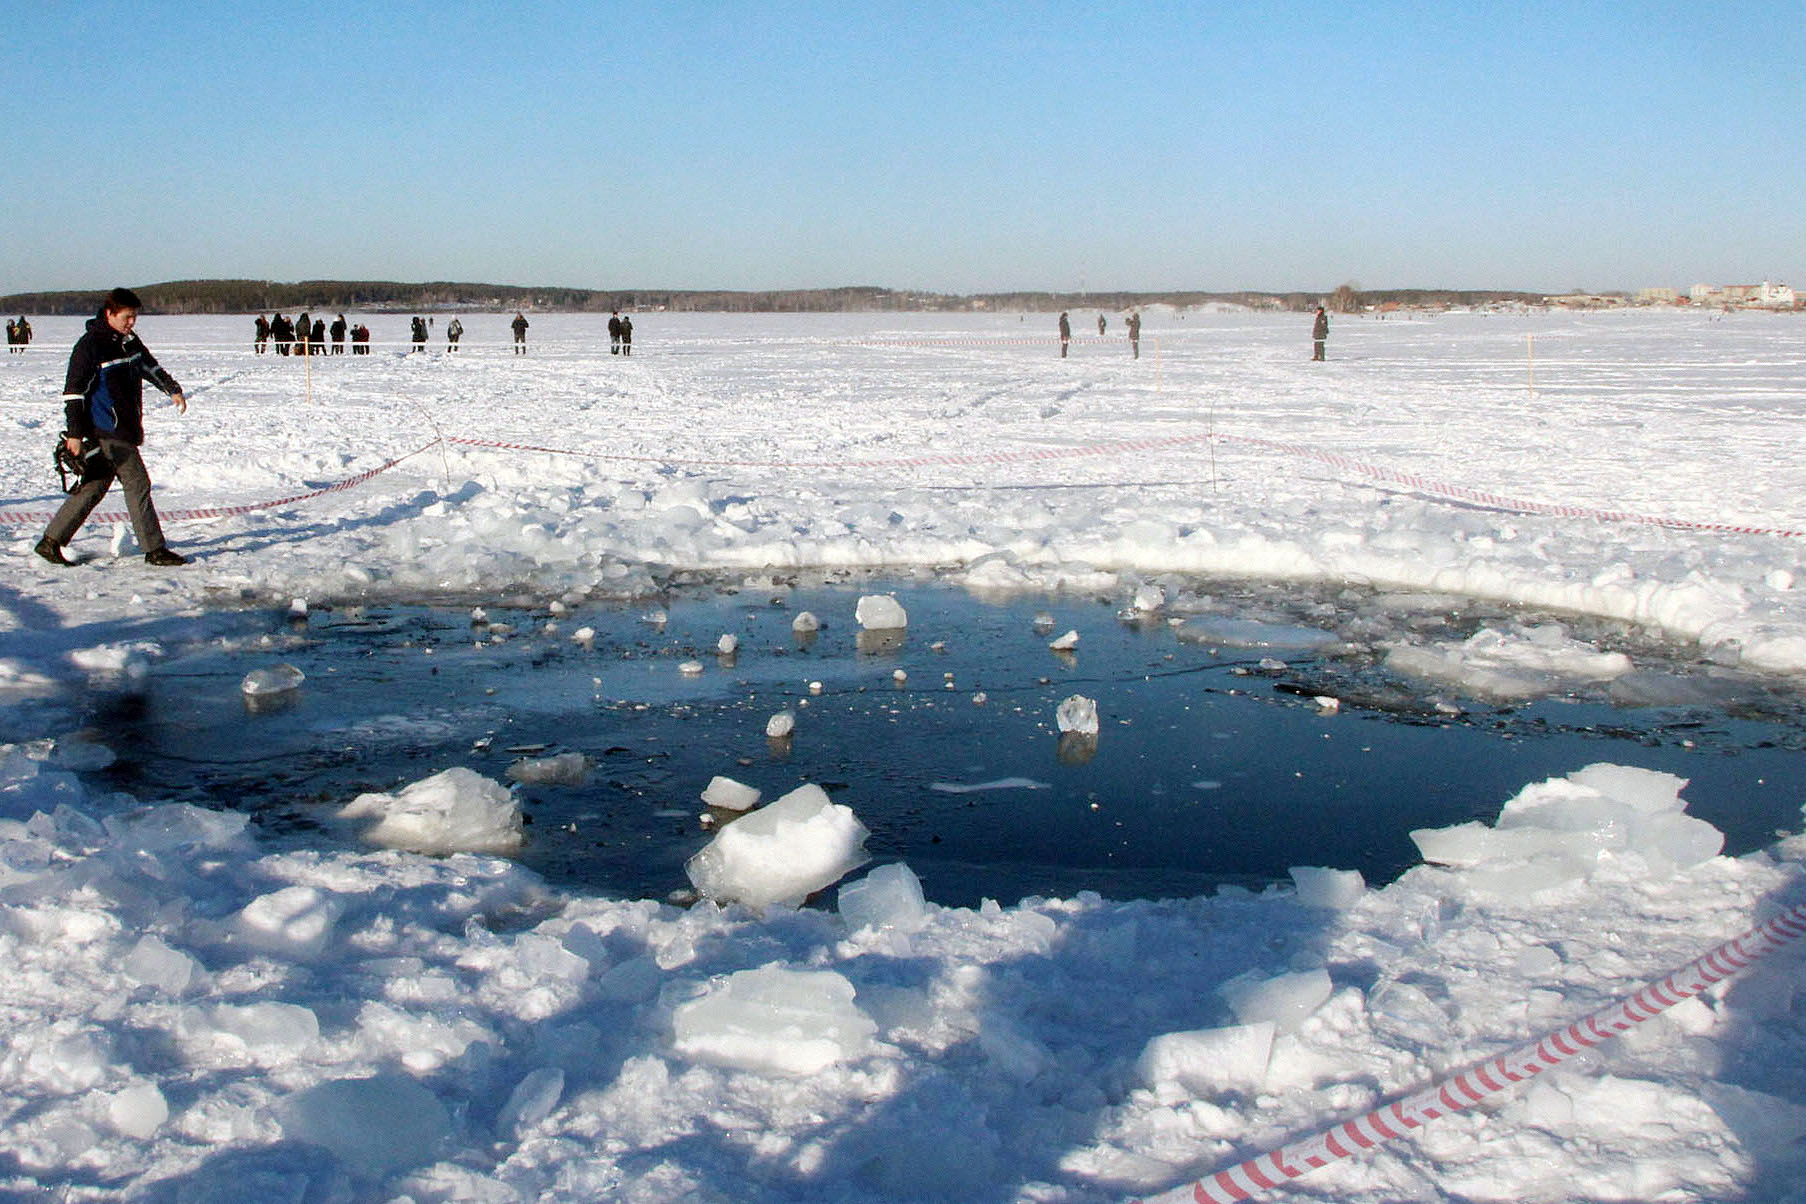 A hole on the ice of Chebarkul Lake in the Russian region of Chelyabinsk, believed to have been made by a meteor fragment, is shown on Feb. 16, 2013. (Kyodo/AP)